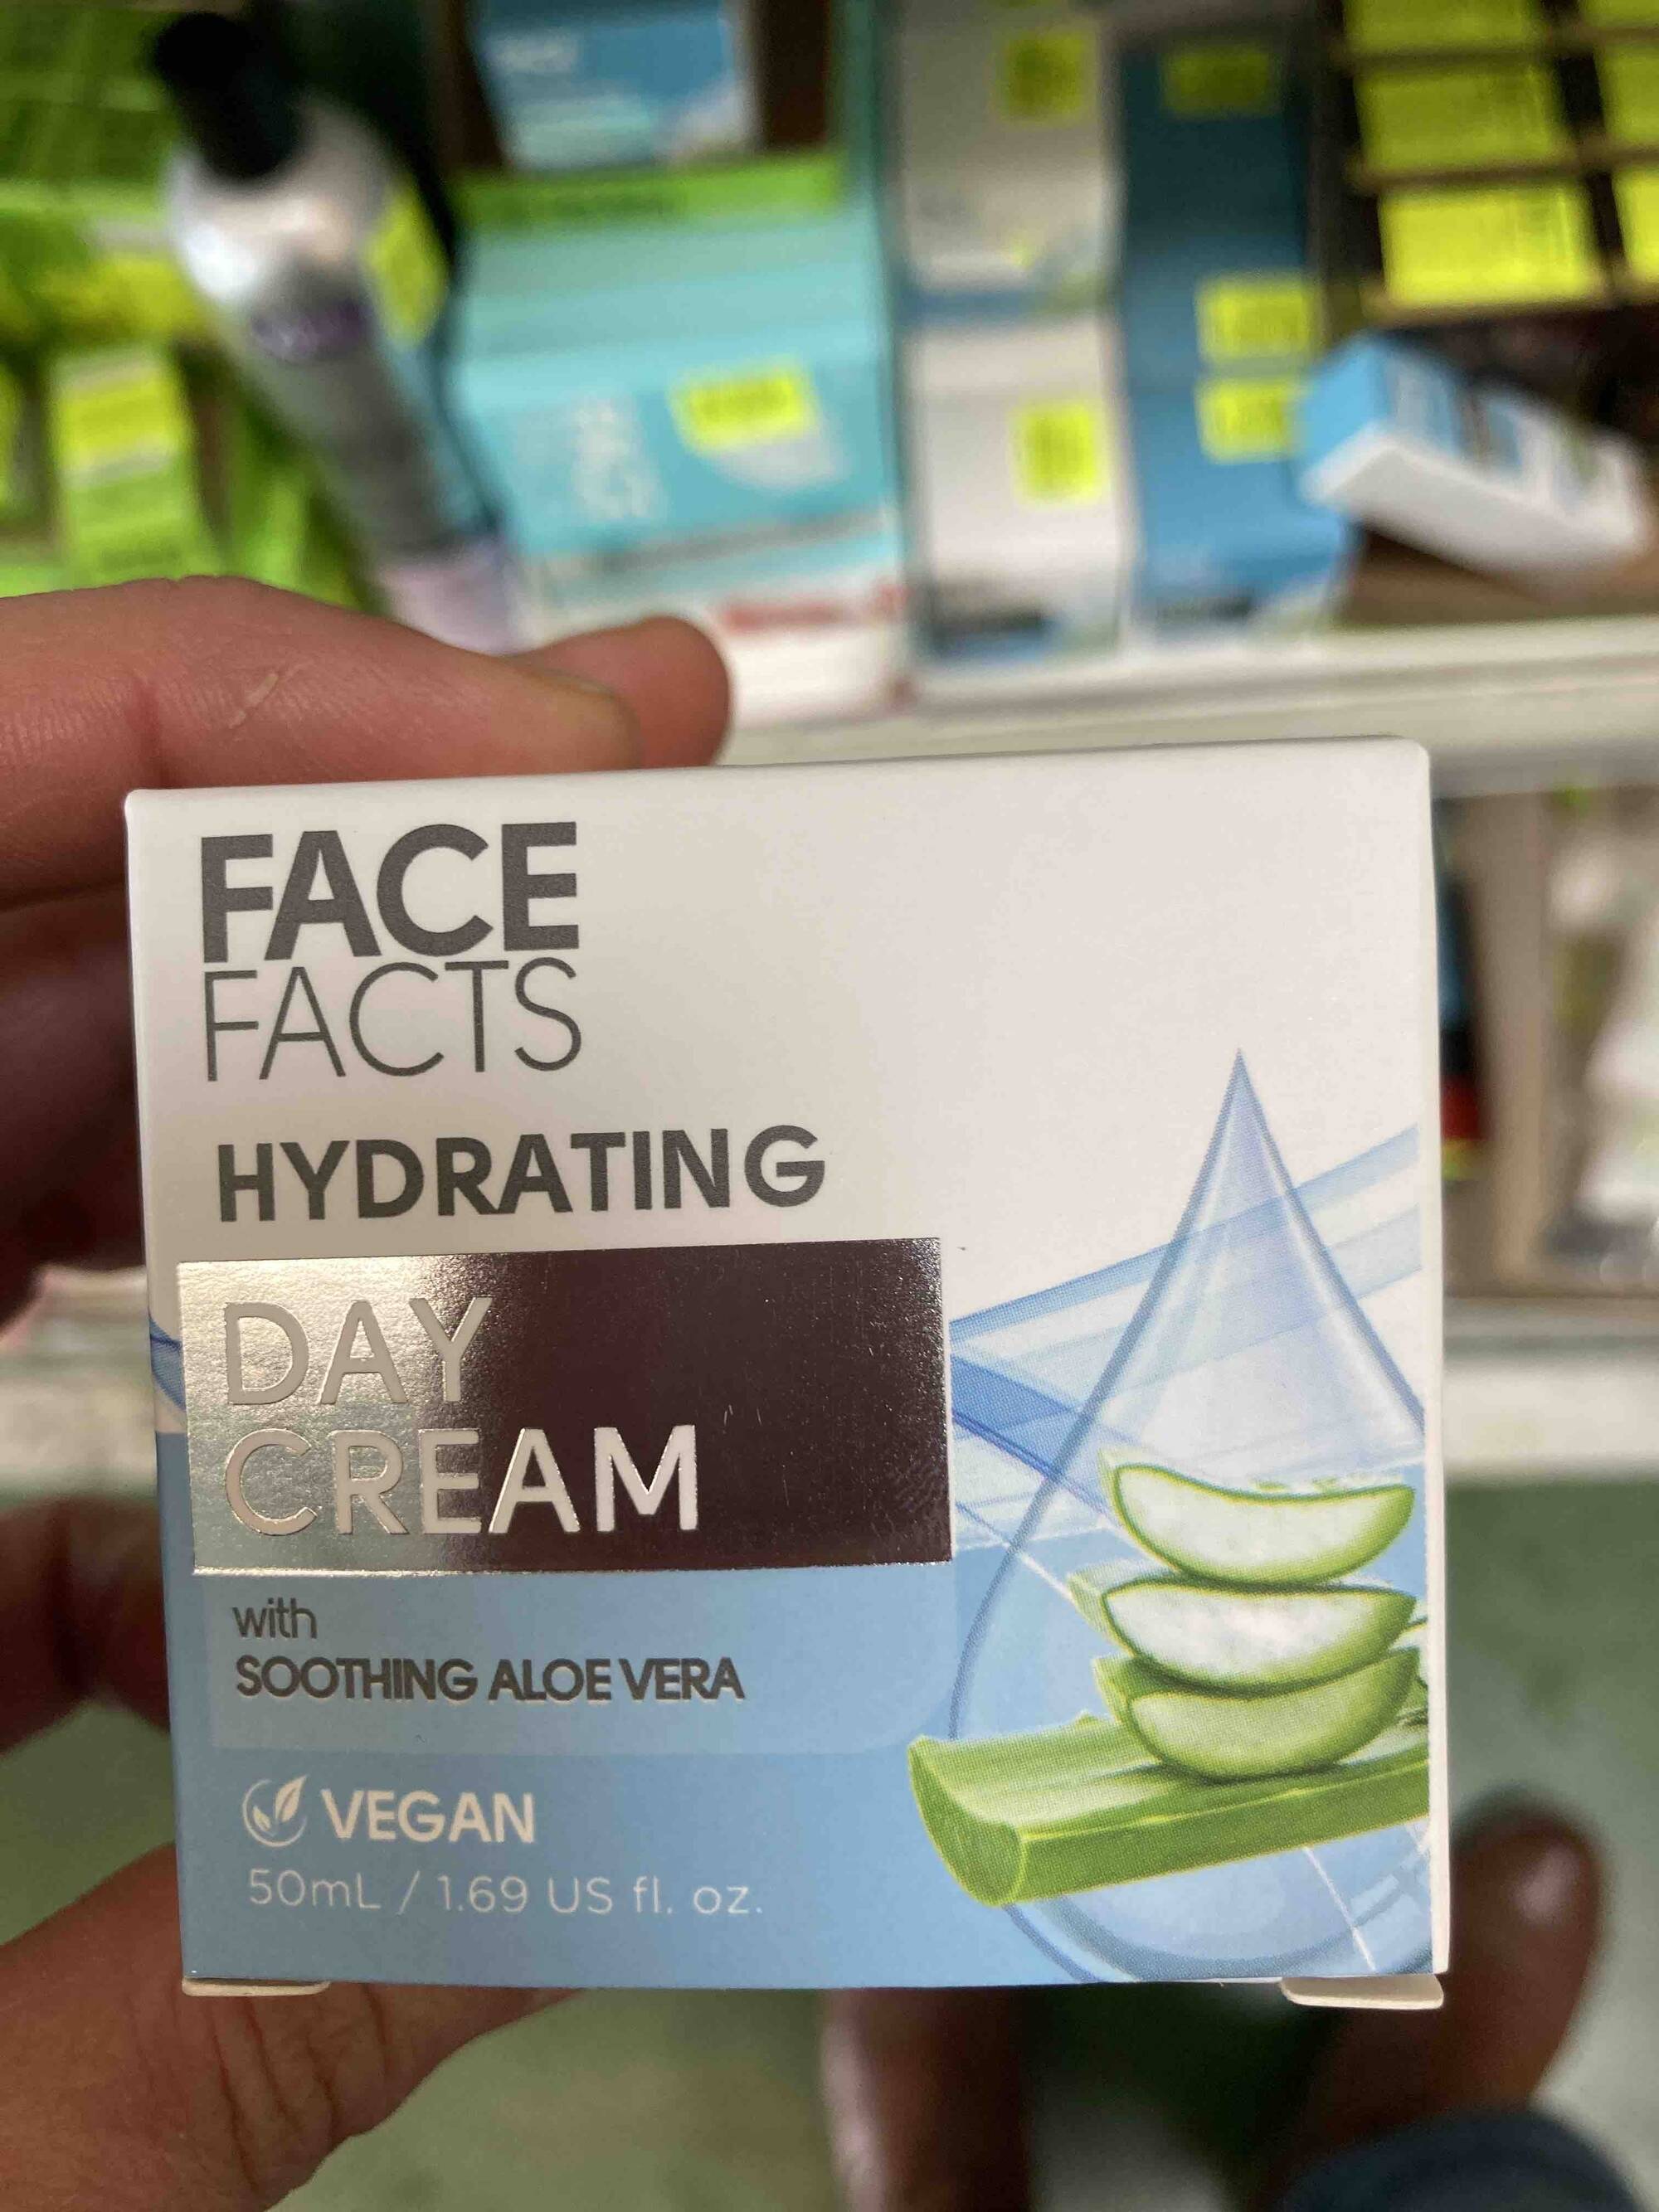 FACE FACTS - Hydrating day cream